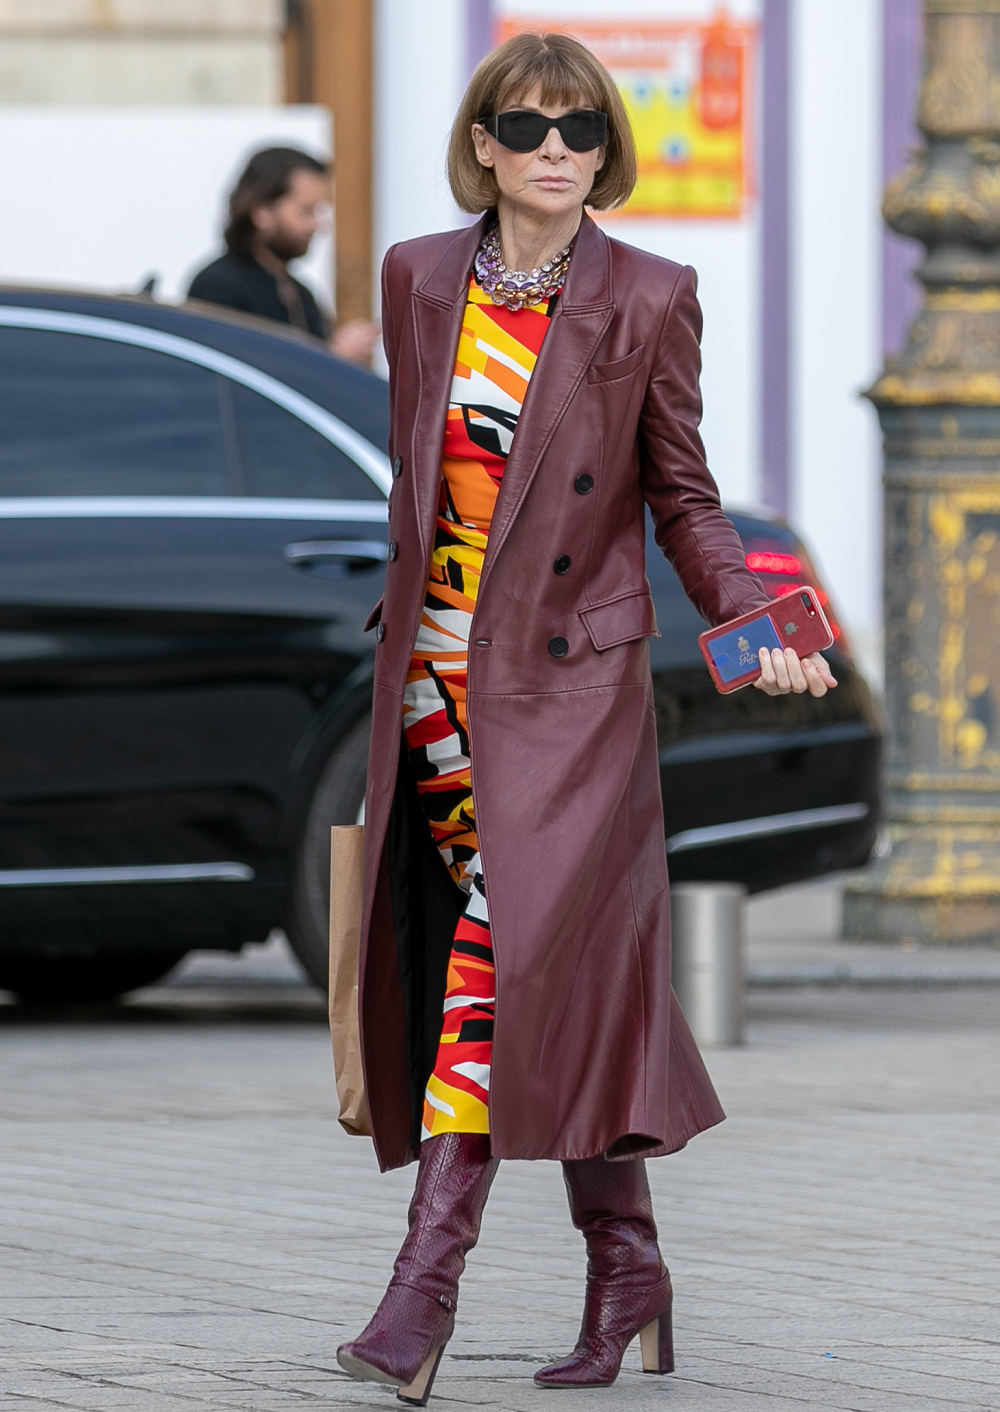 over 50 fashion and clothing inspiration: Anna Wintour in a leather coat, printed dress and knee boots